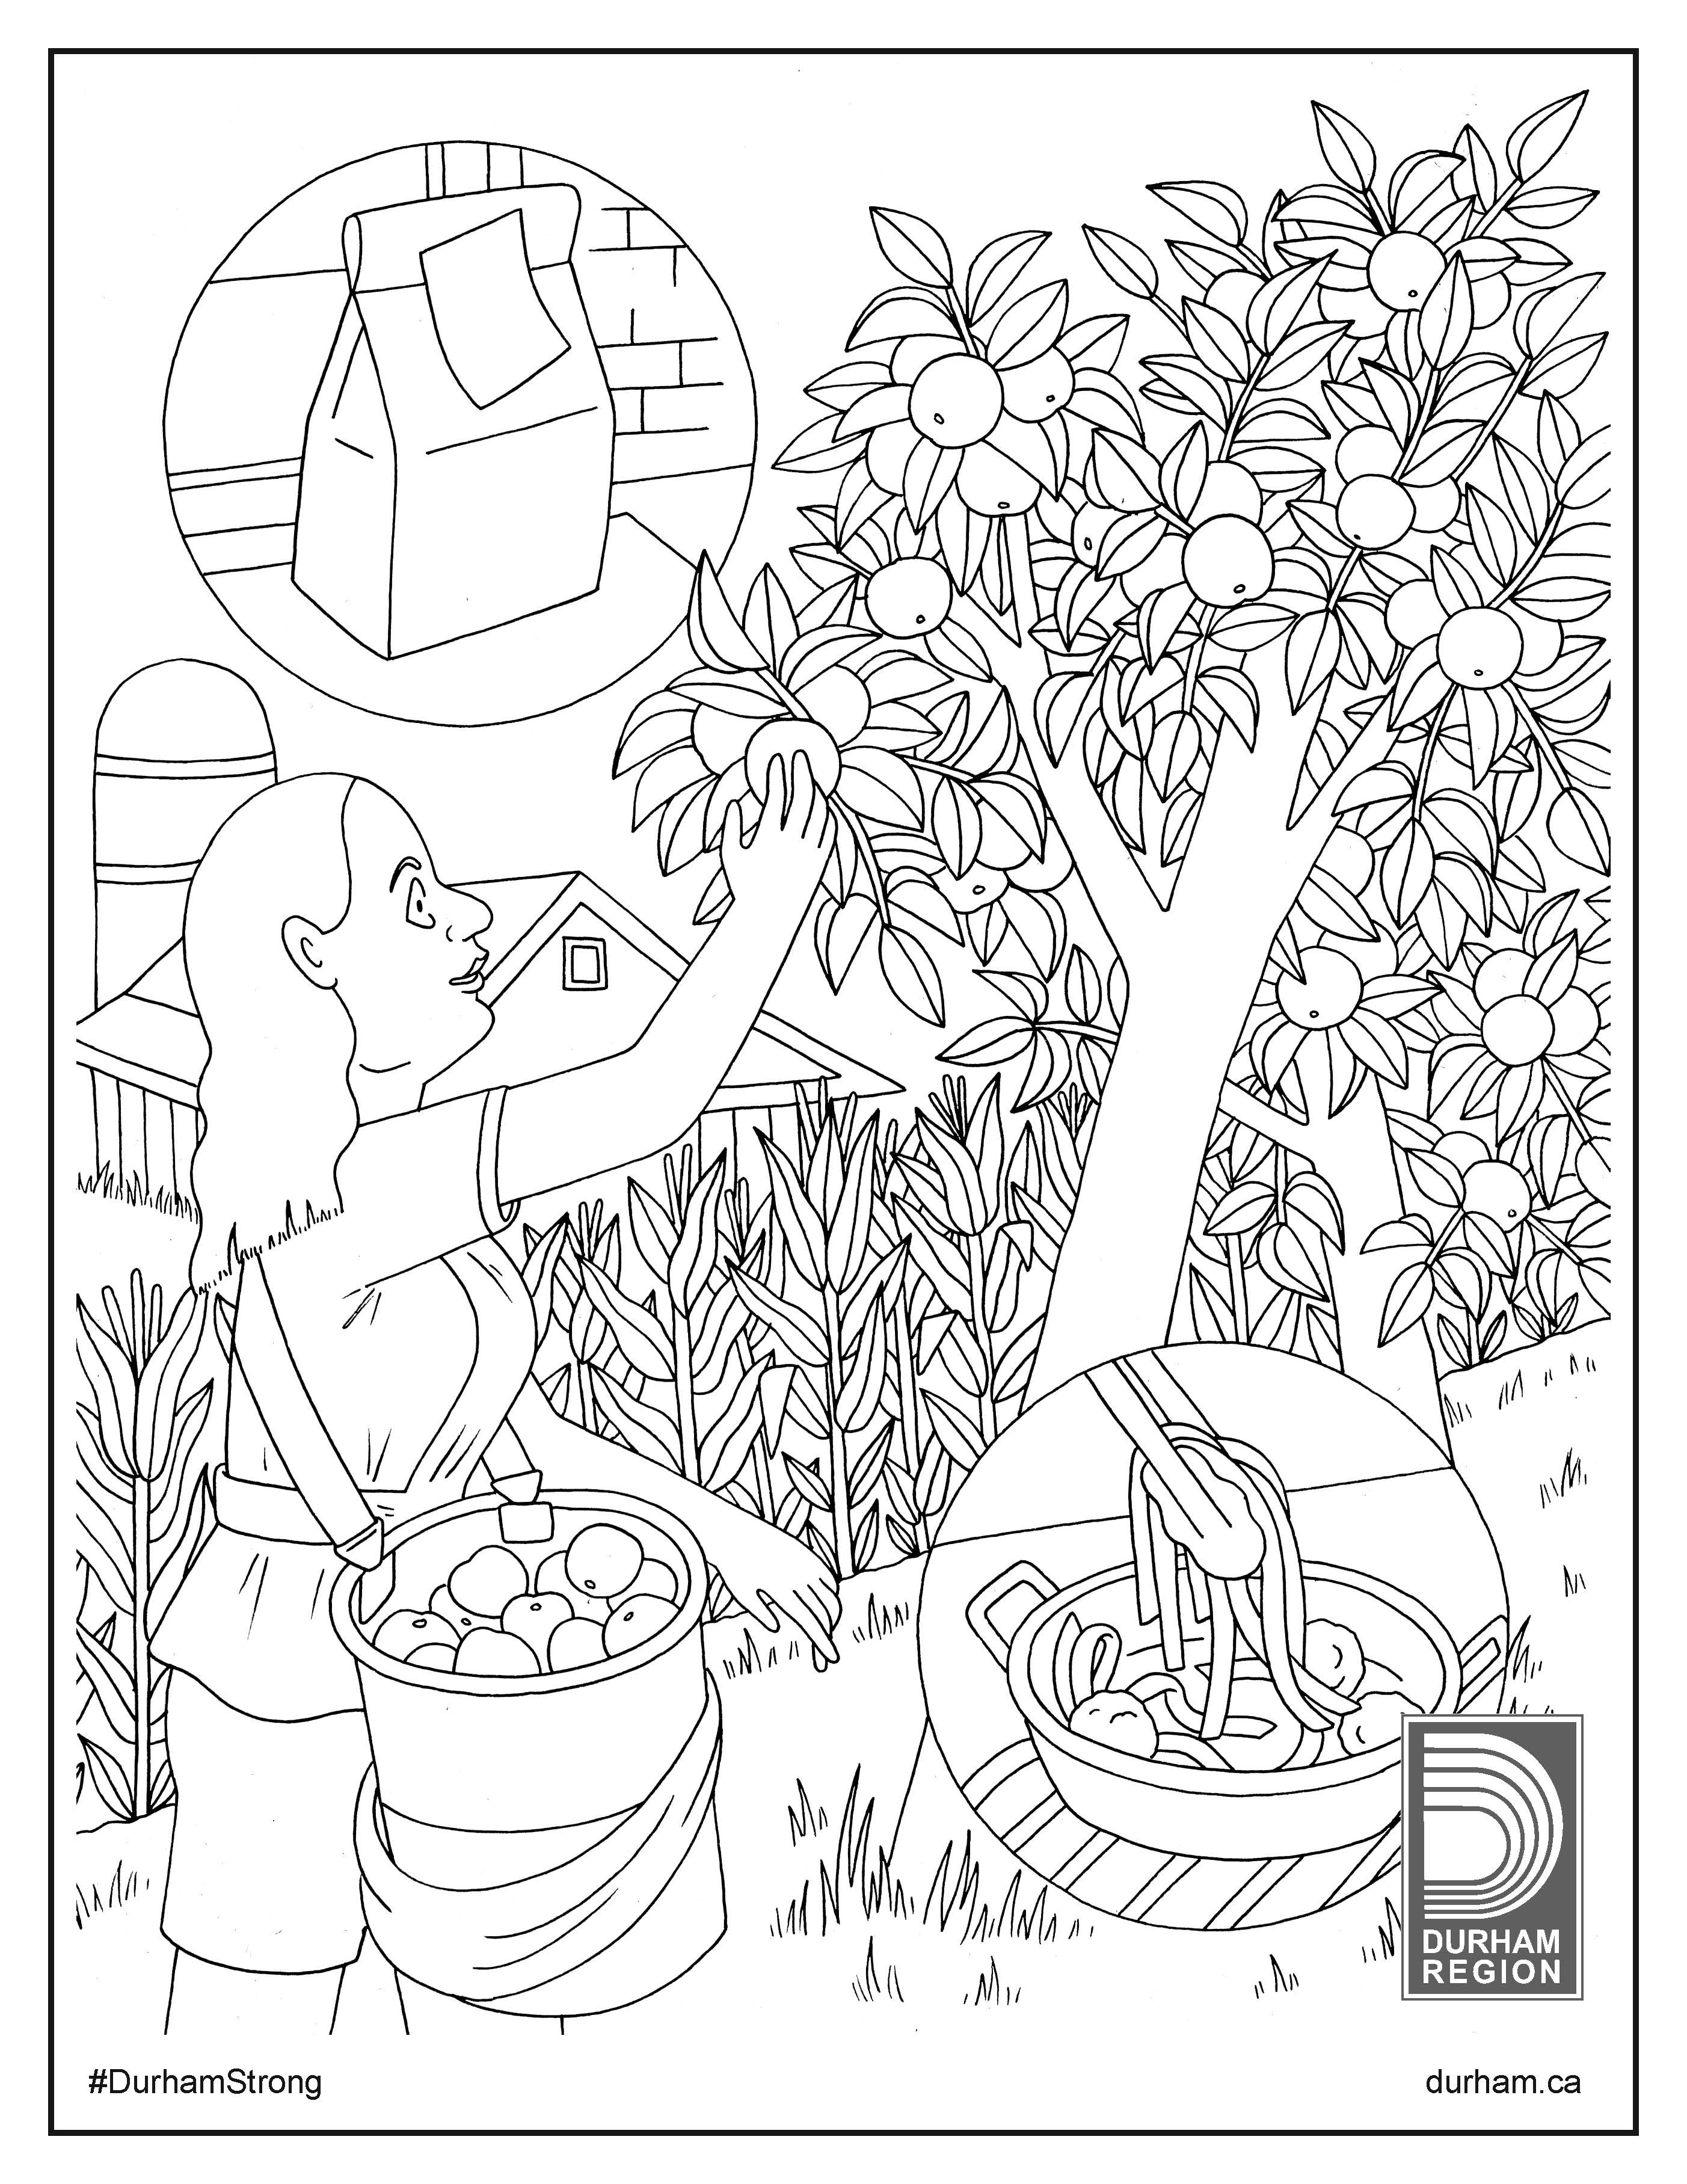 Illustration of person picking an apple from tree